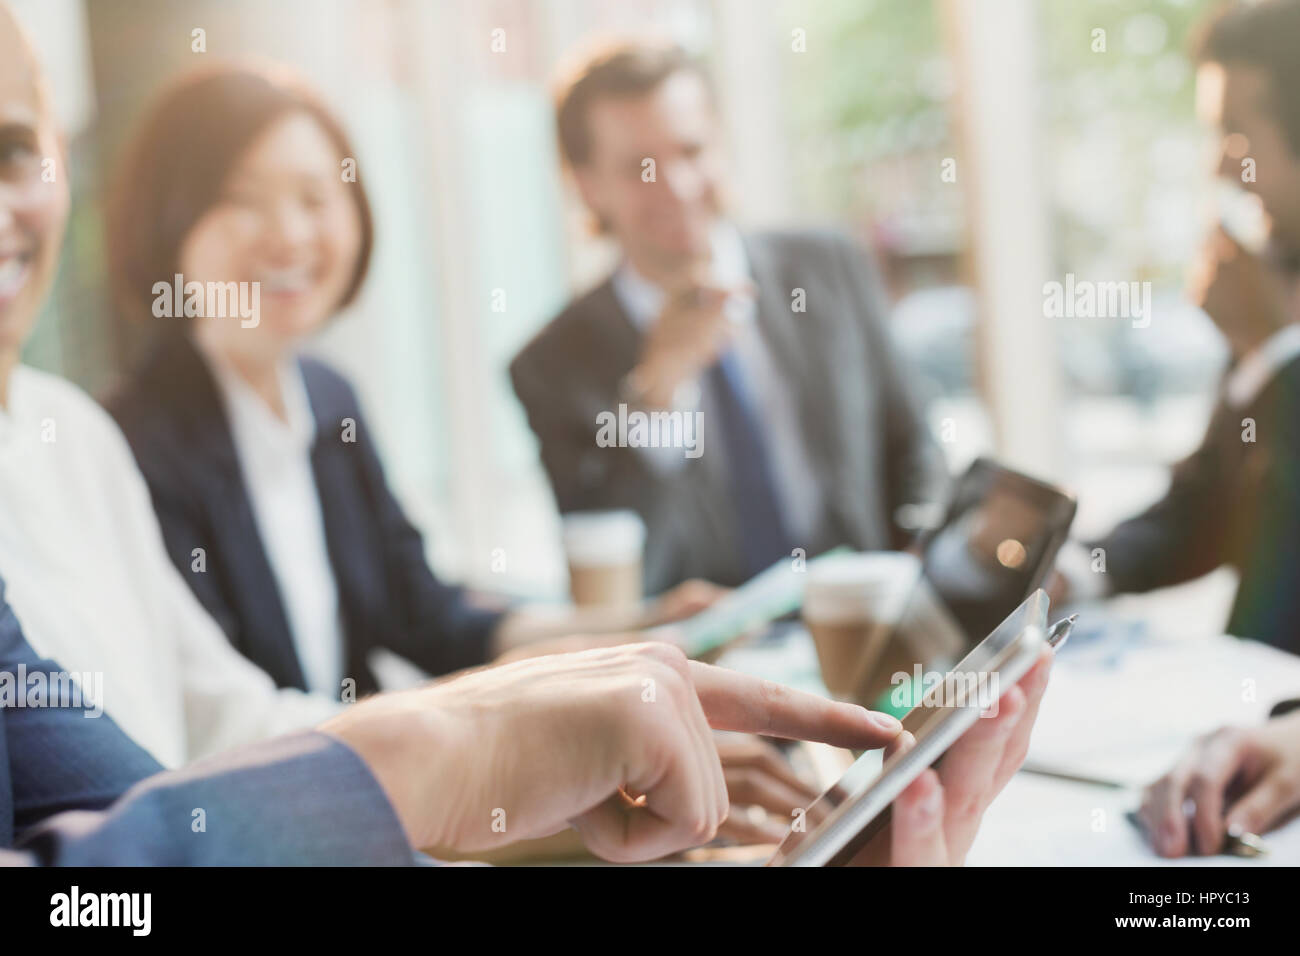 Businessman touching digital tablet in conference room meeting Stock Photo